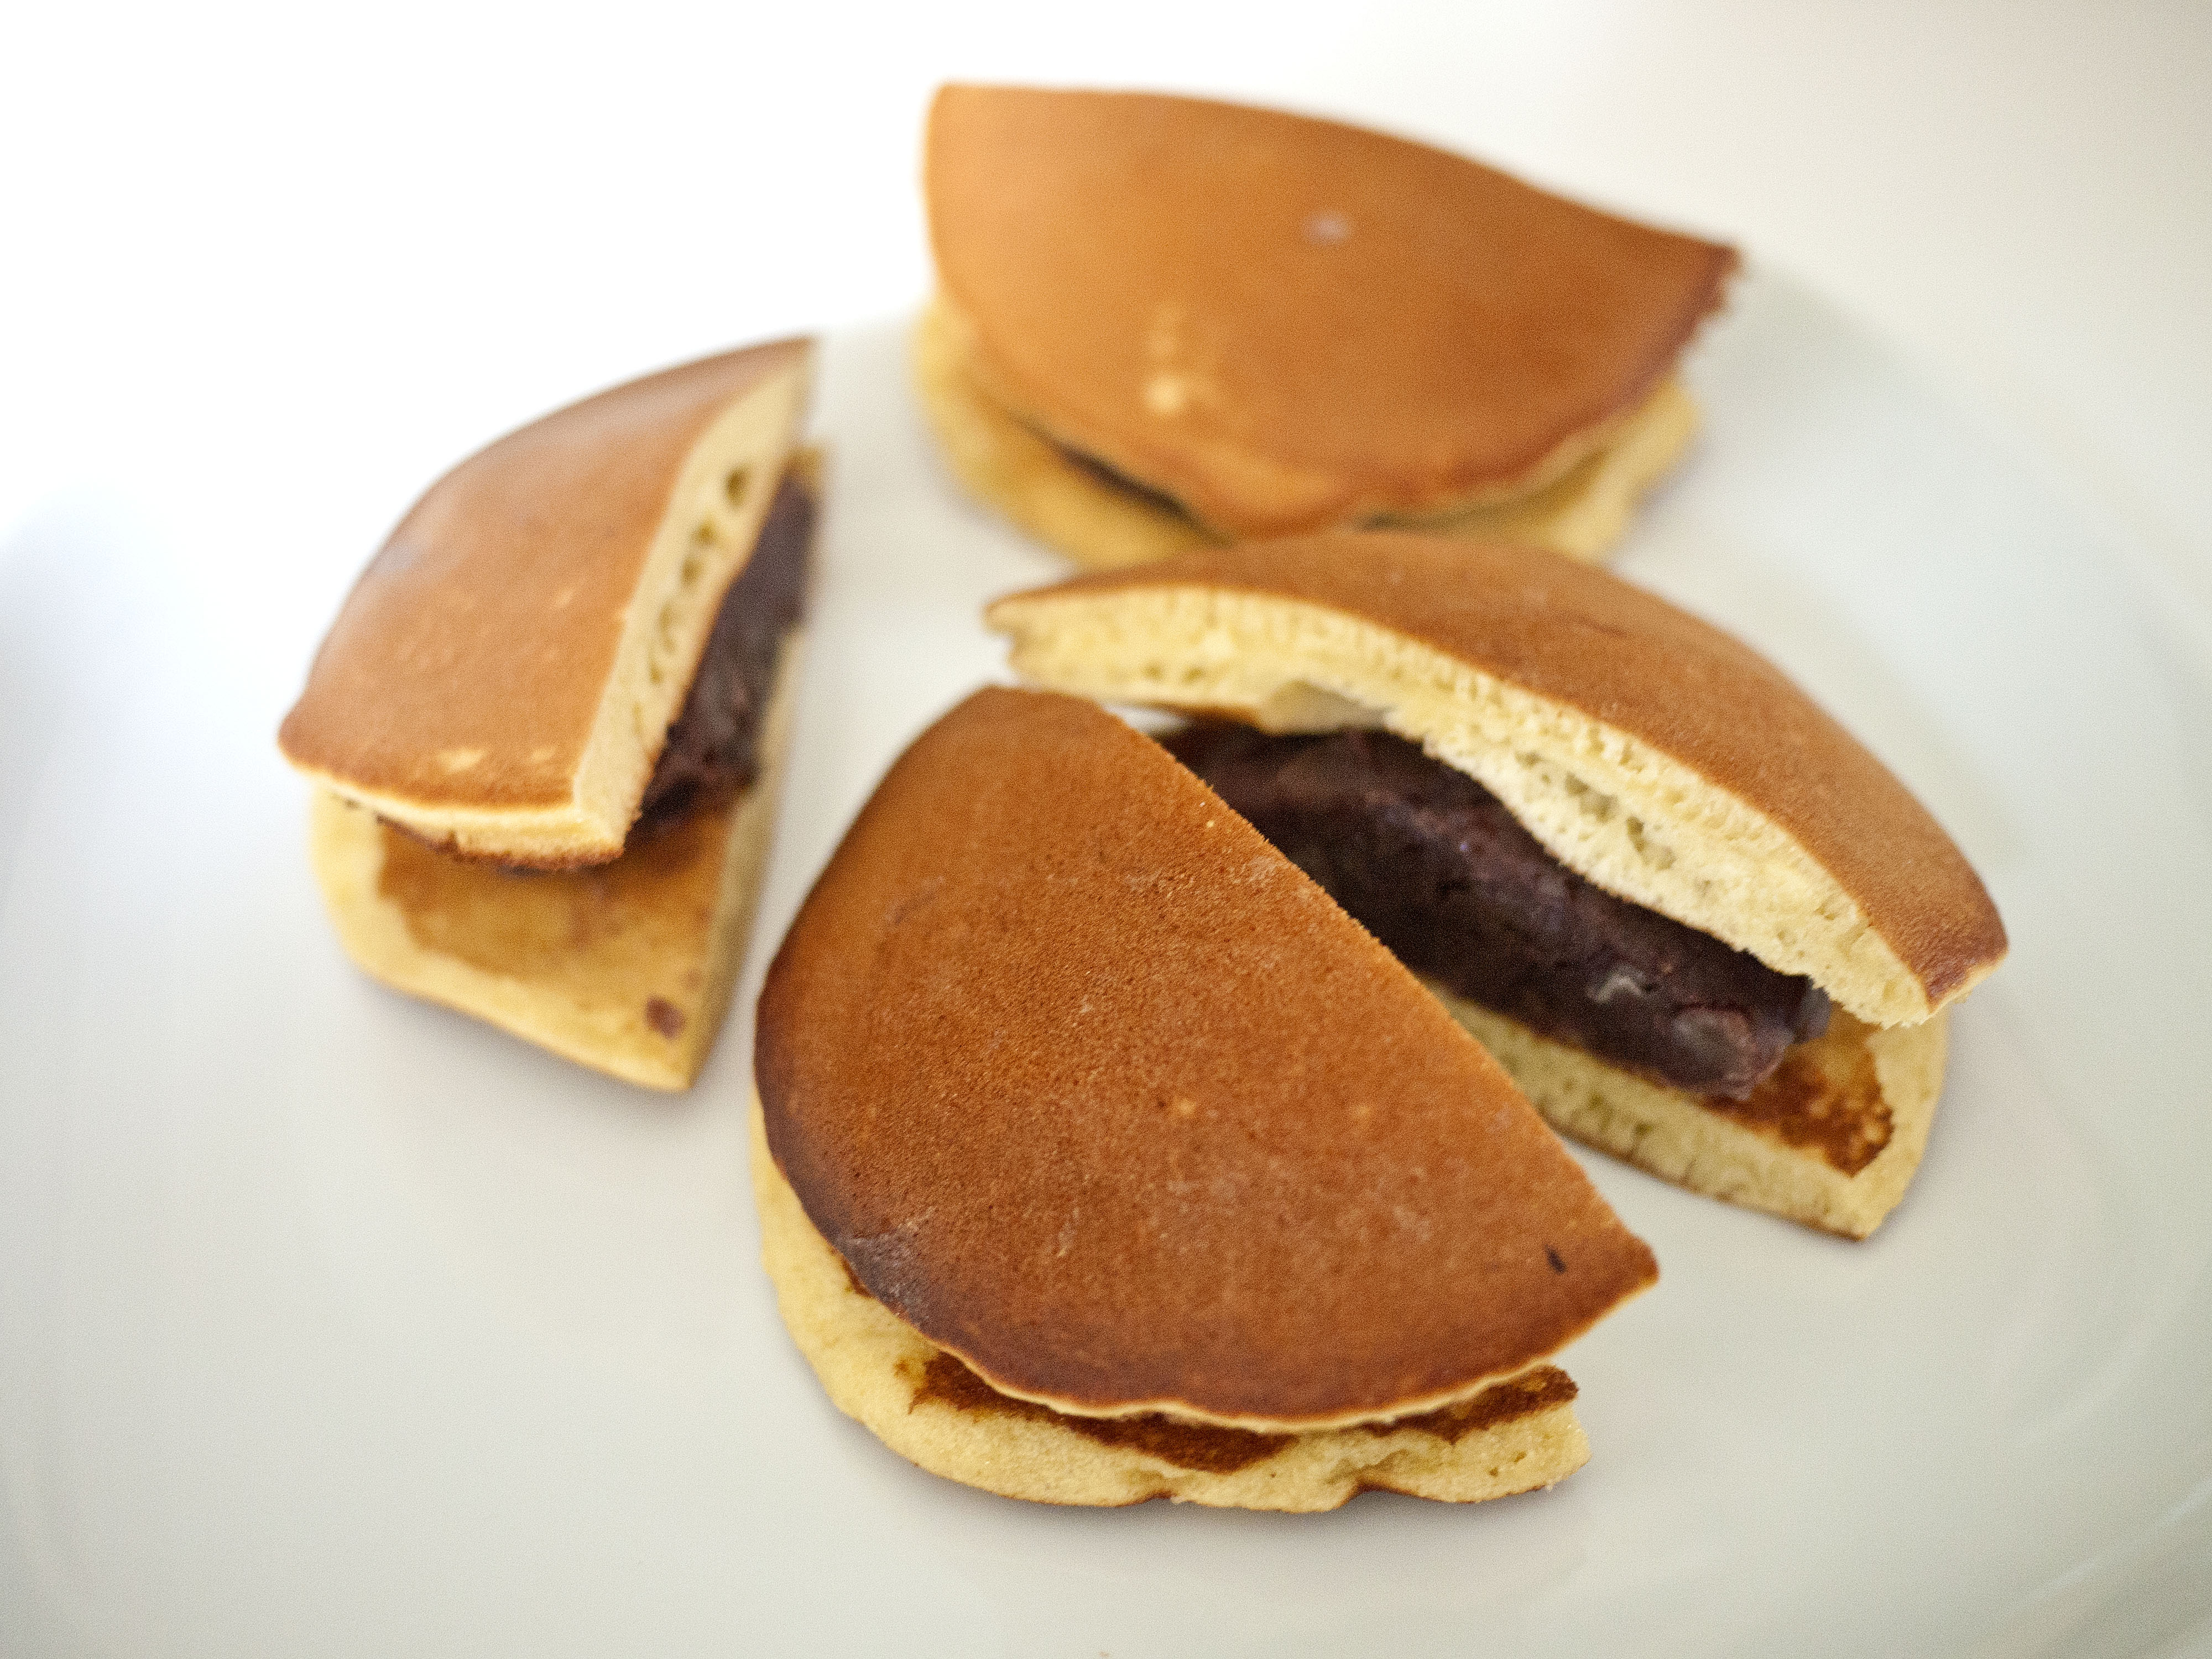 Pancake sandwich: Dorayaki usually contains bean paste, though cream and other fillings have become popular too. | MAKIKO ITOH